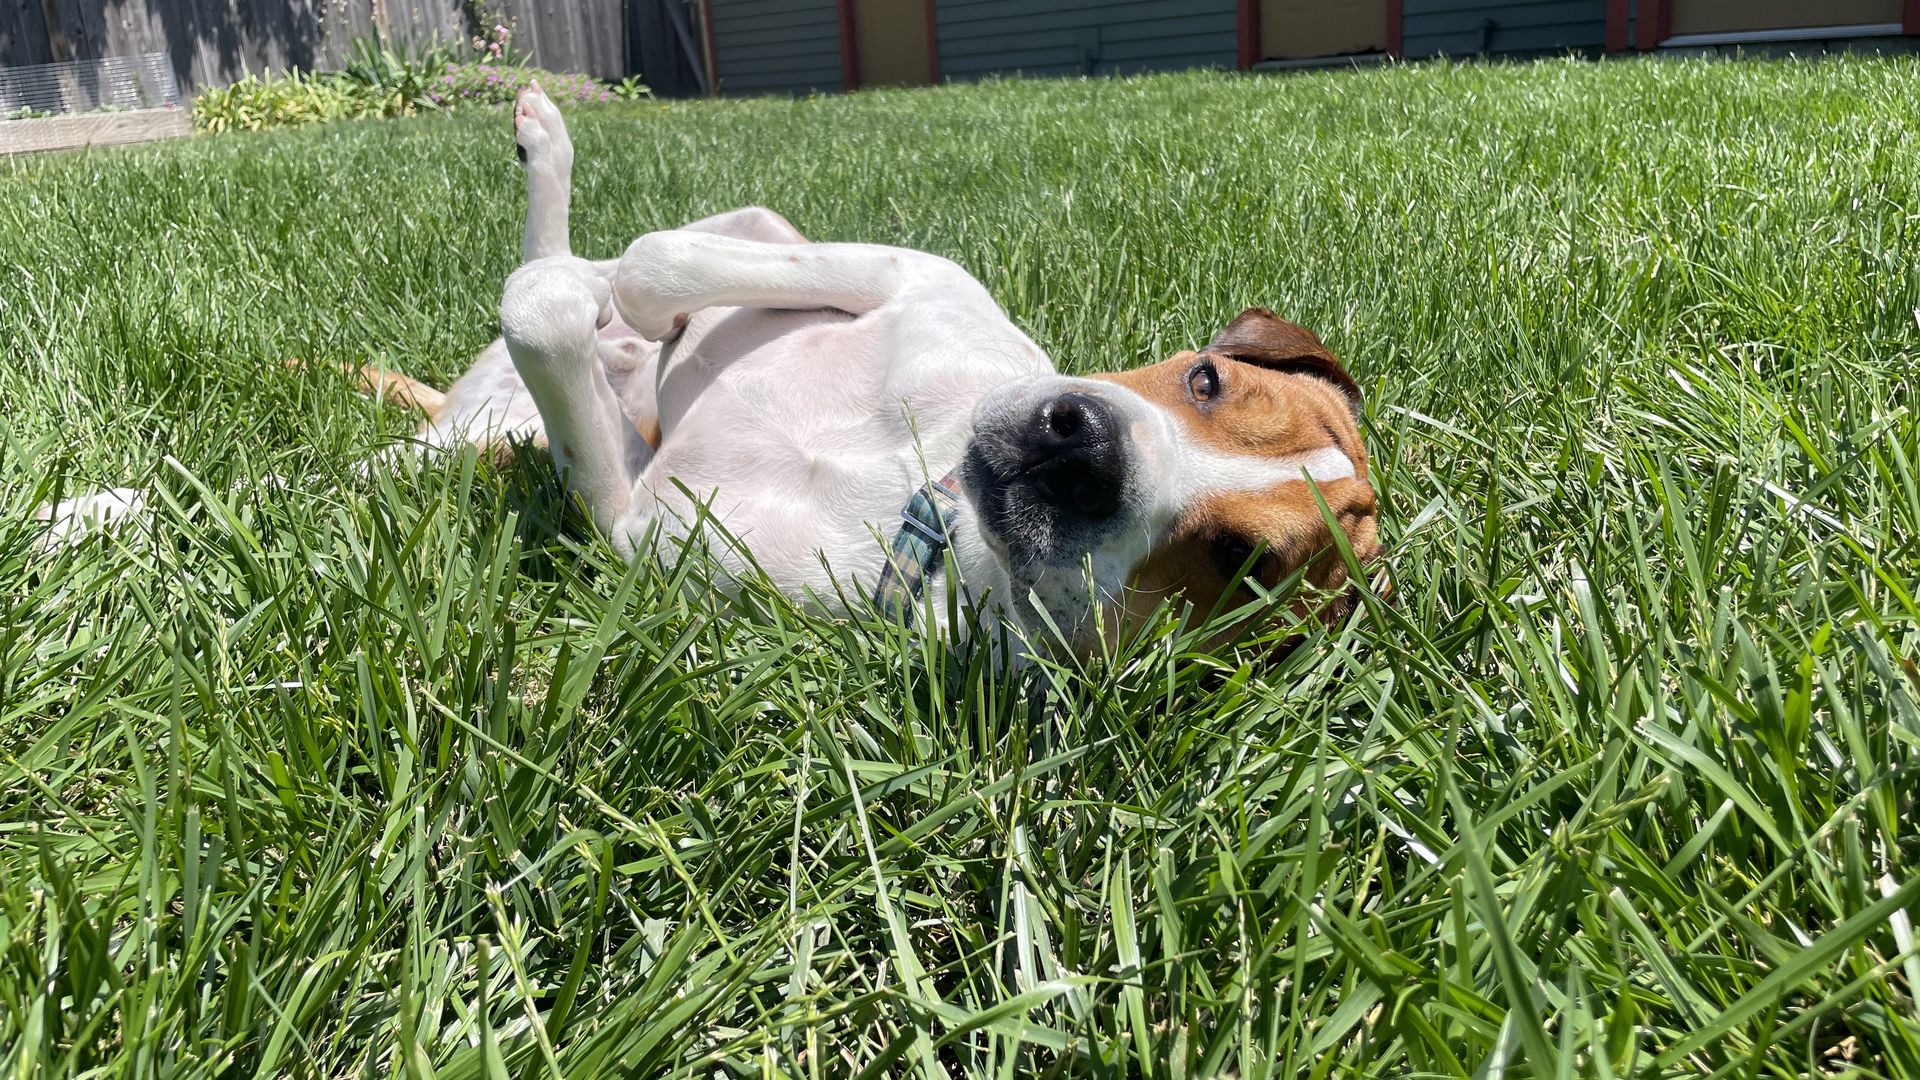 A white and brown dog in grass